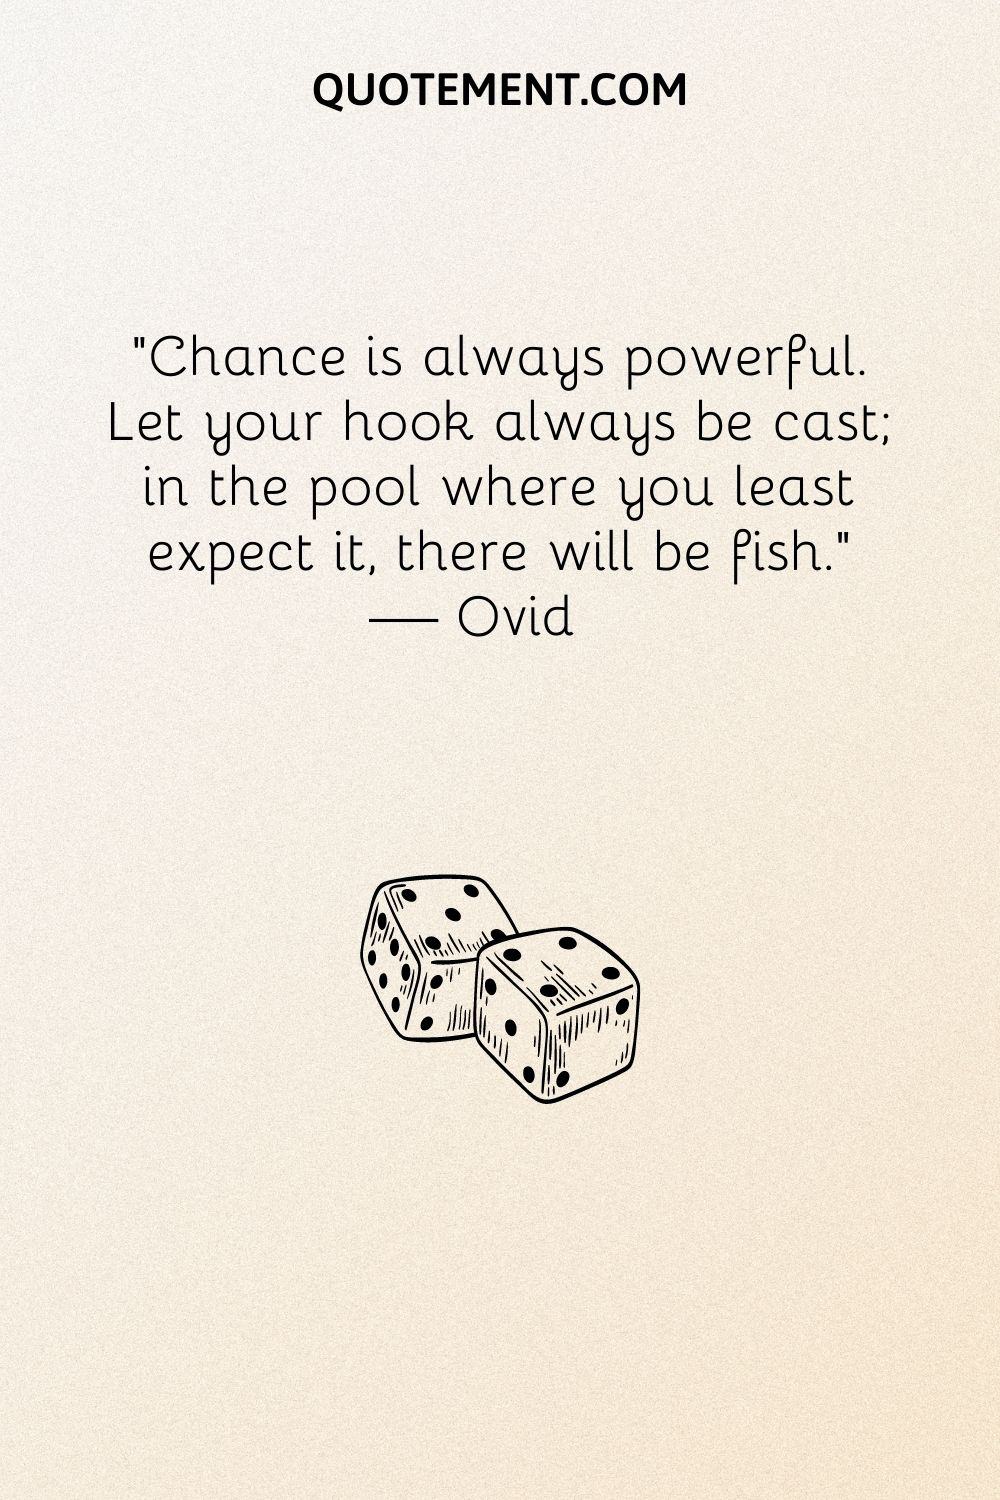 Chance is always powerful.